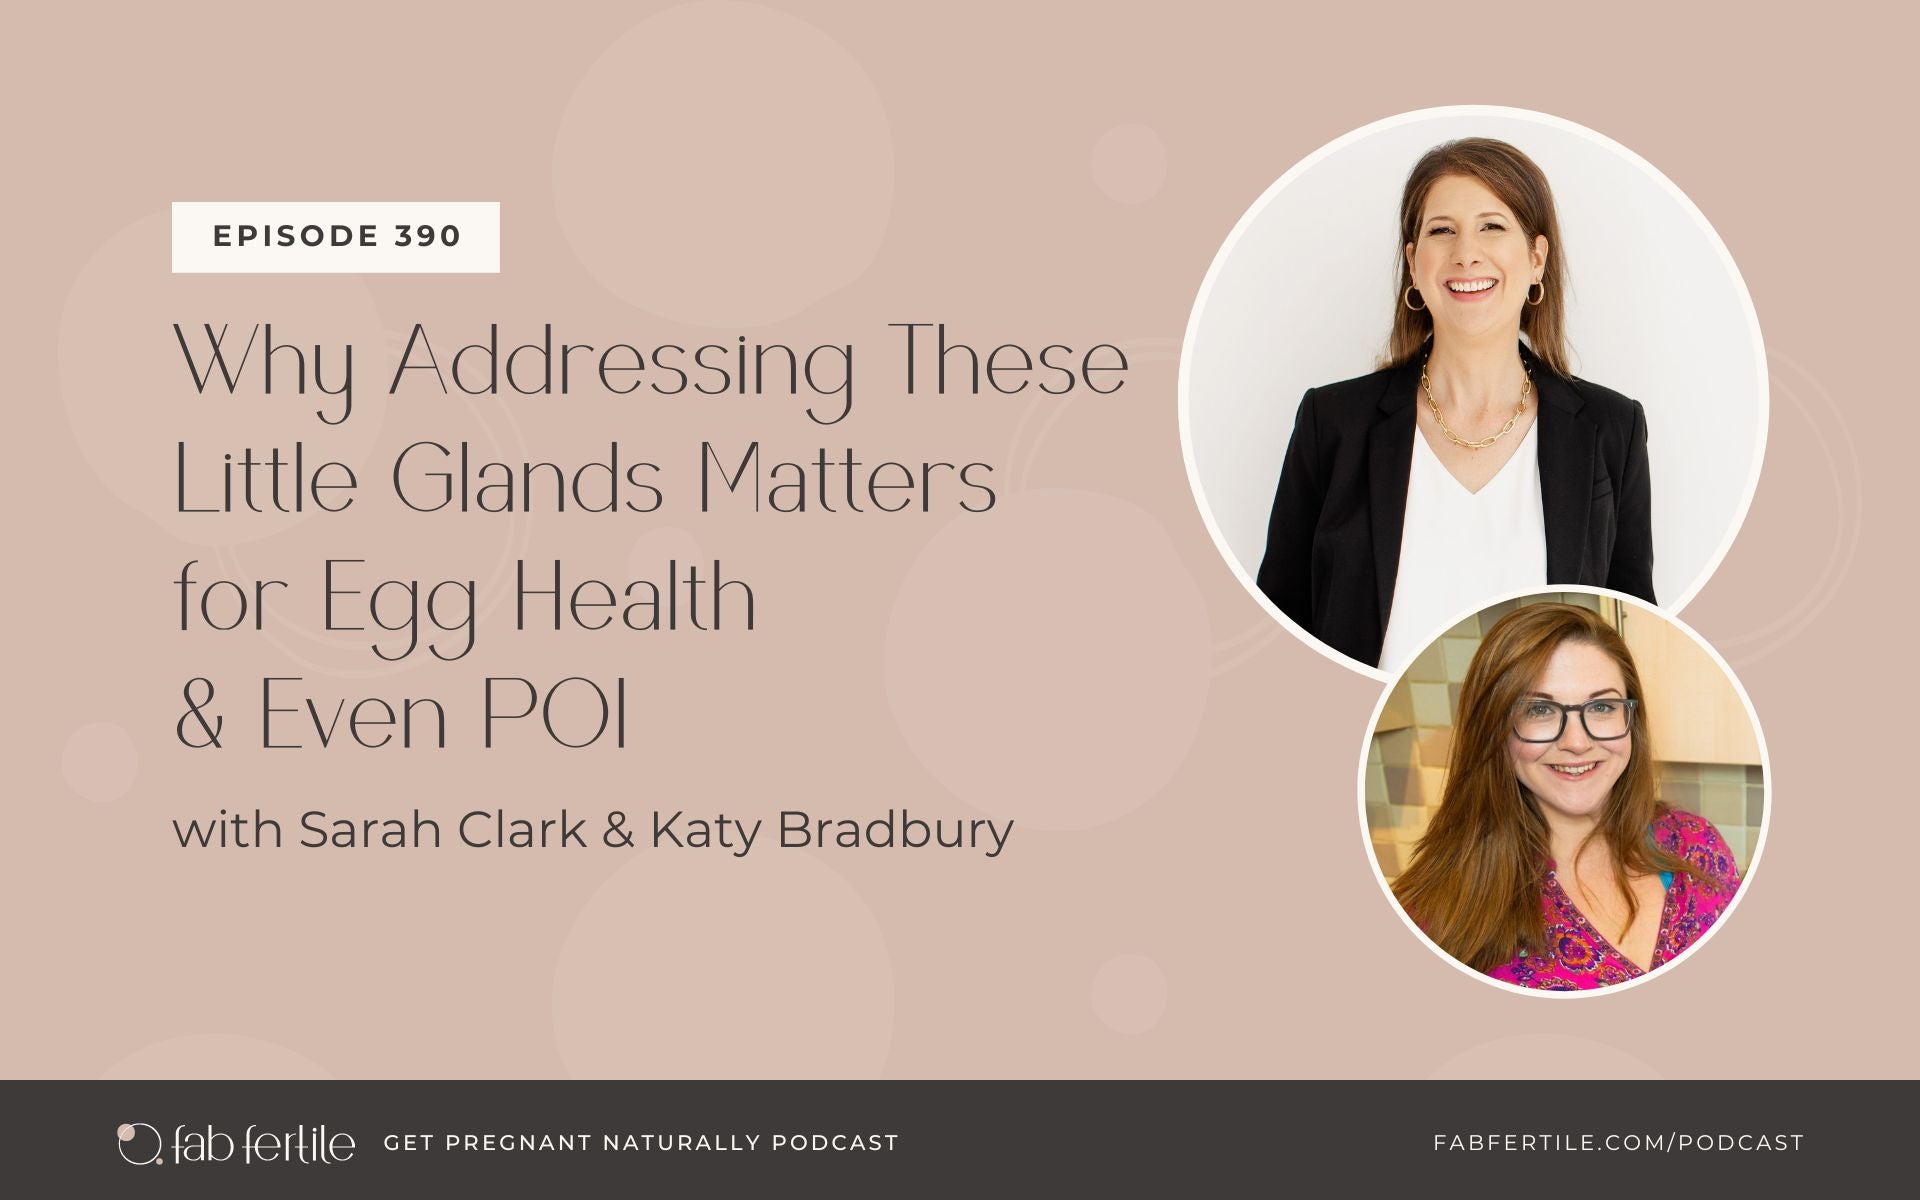 Why Addressing These Little Glands Matters for Egg Health and Even POI